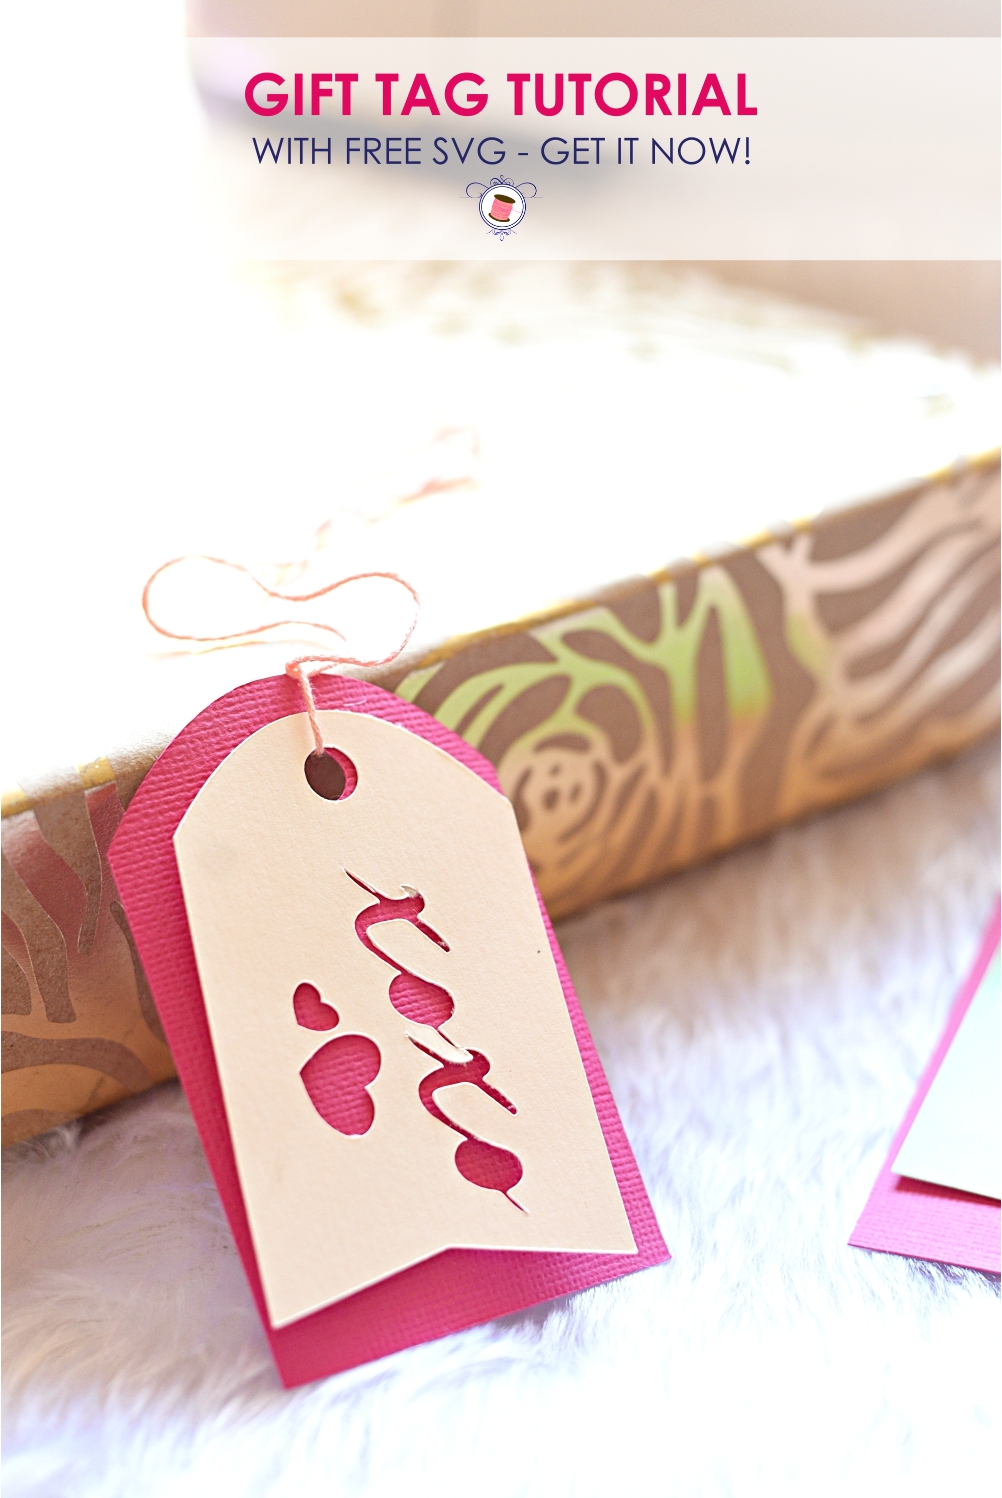 Free SVG Gift Tags free svg cut files gift tag template gift tag svg free cricut gift tags cricut maker projects tags made with cricut